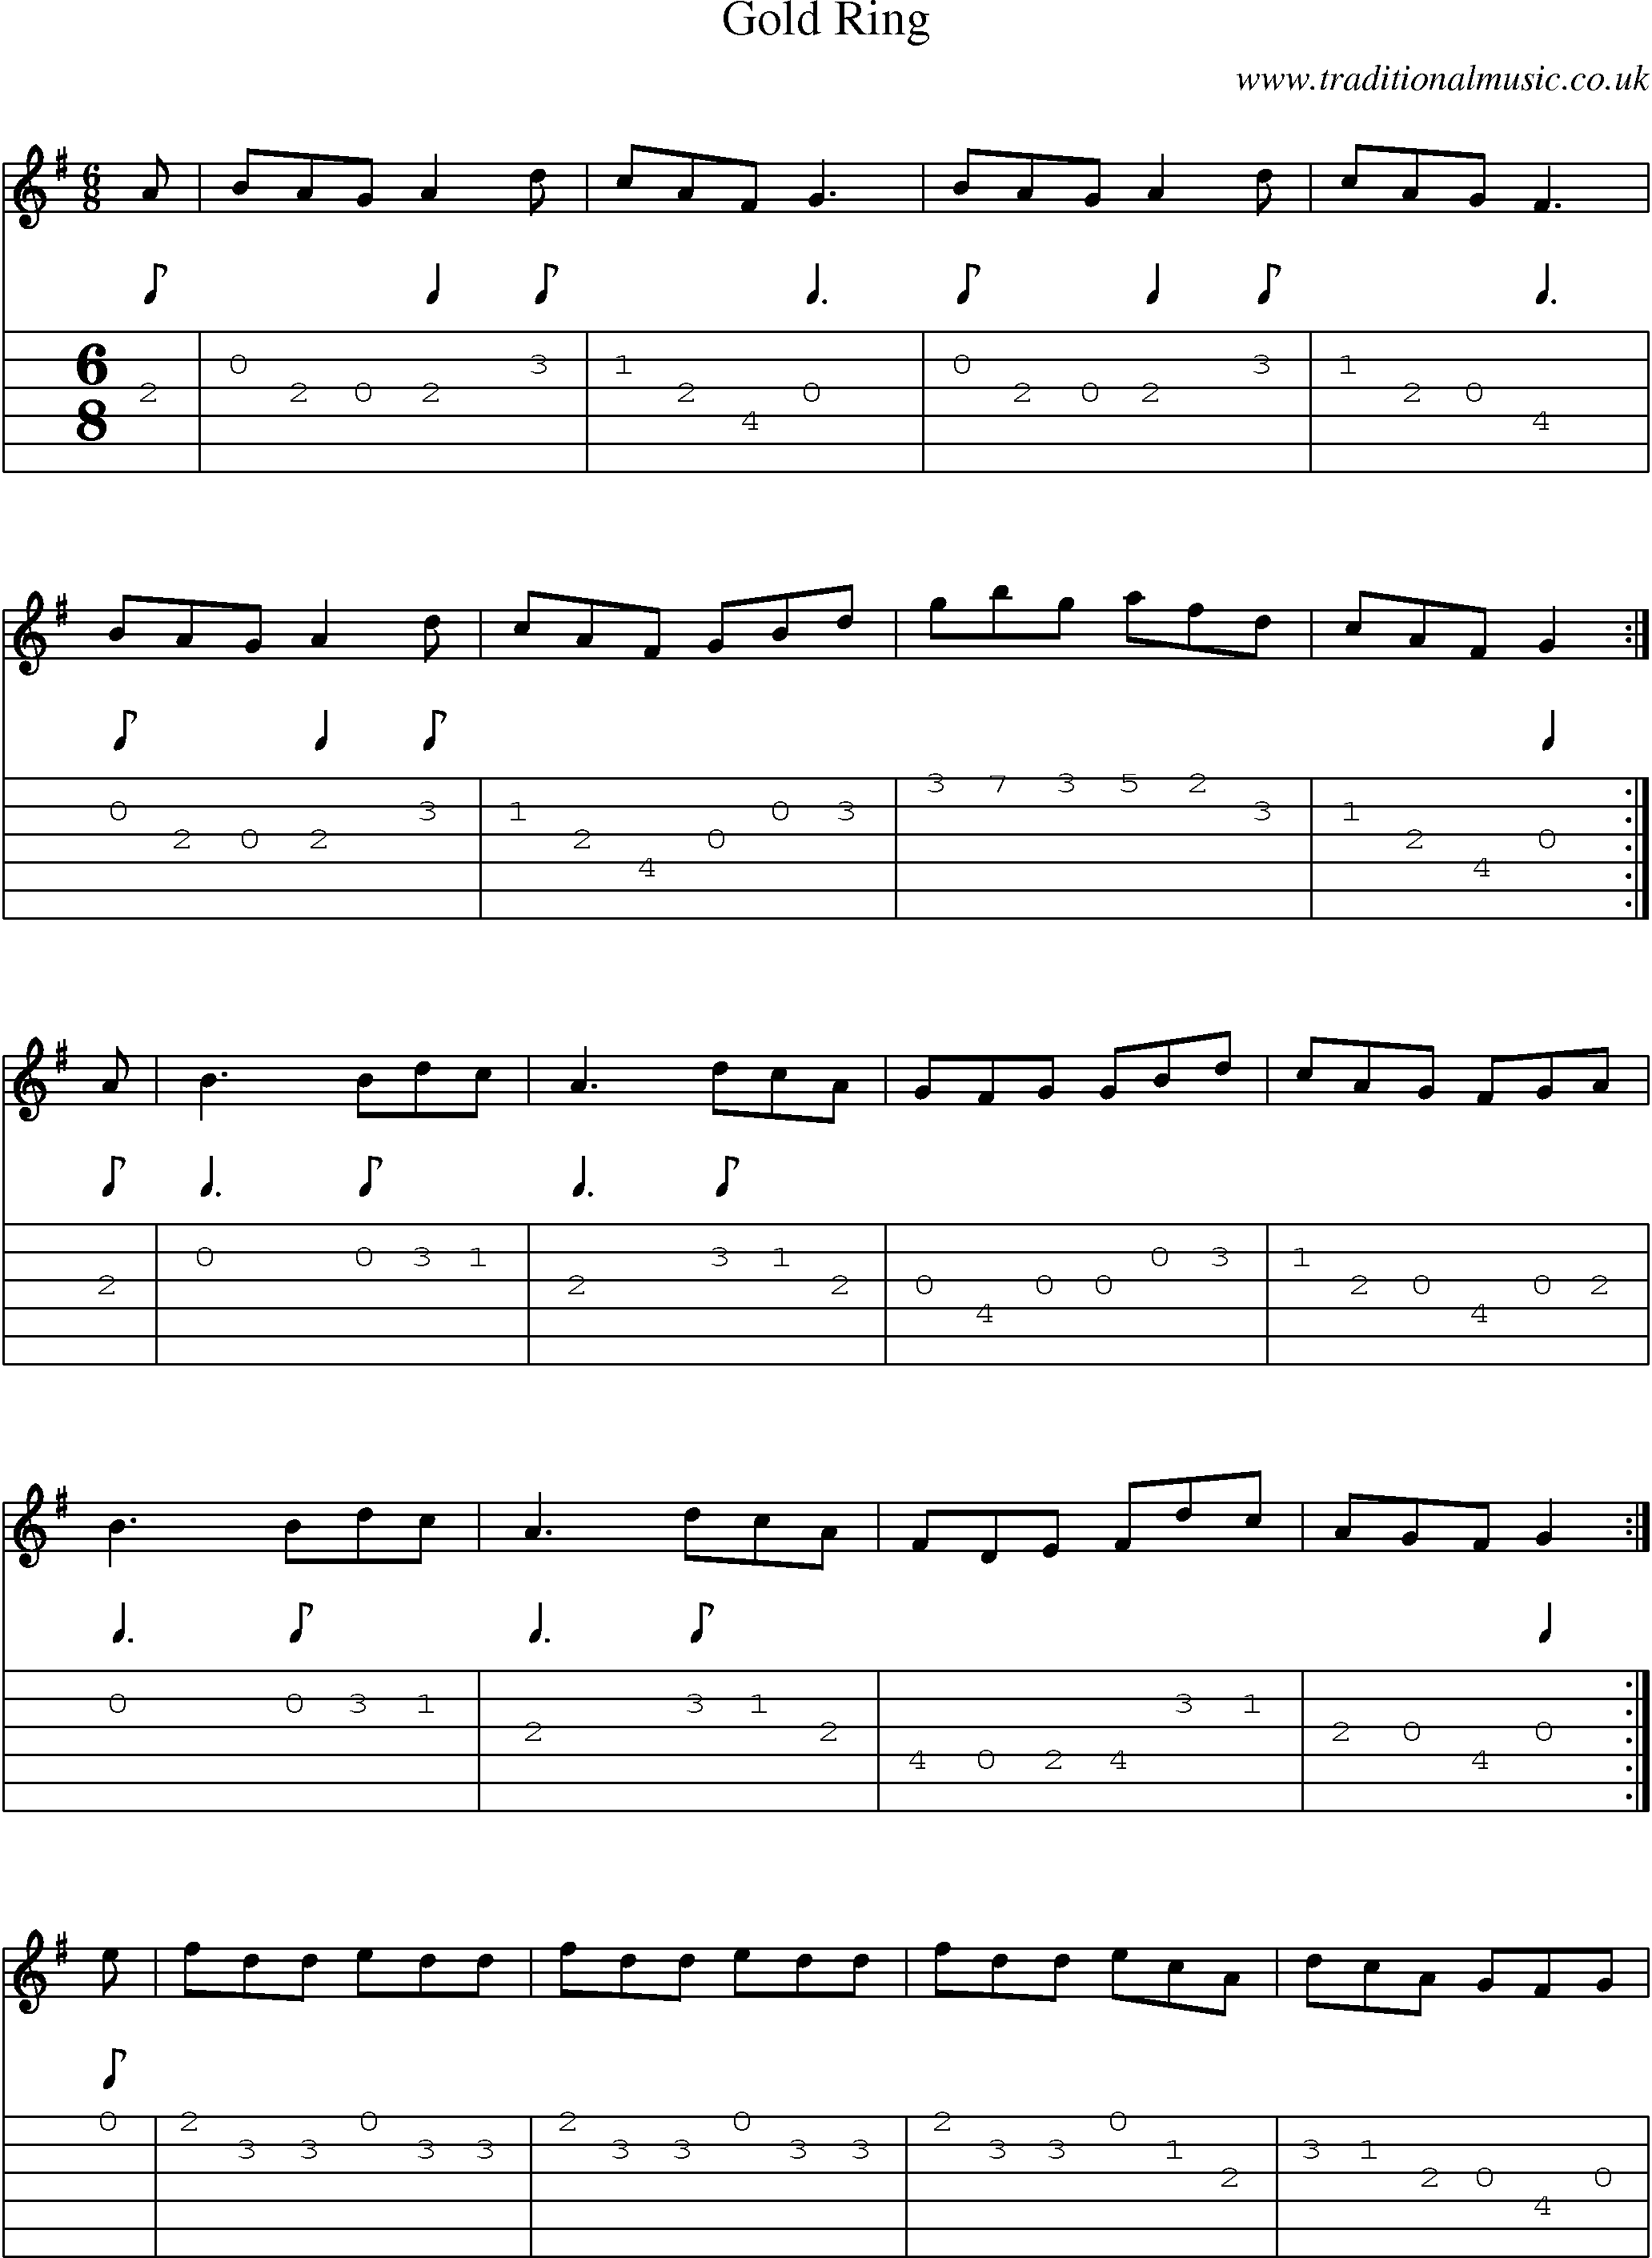 Music Score and Guitar Tabs for Gold Ring